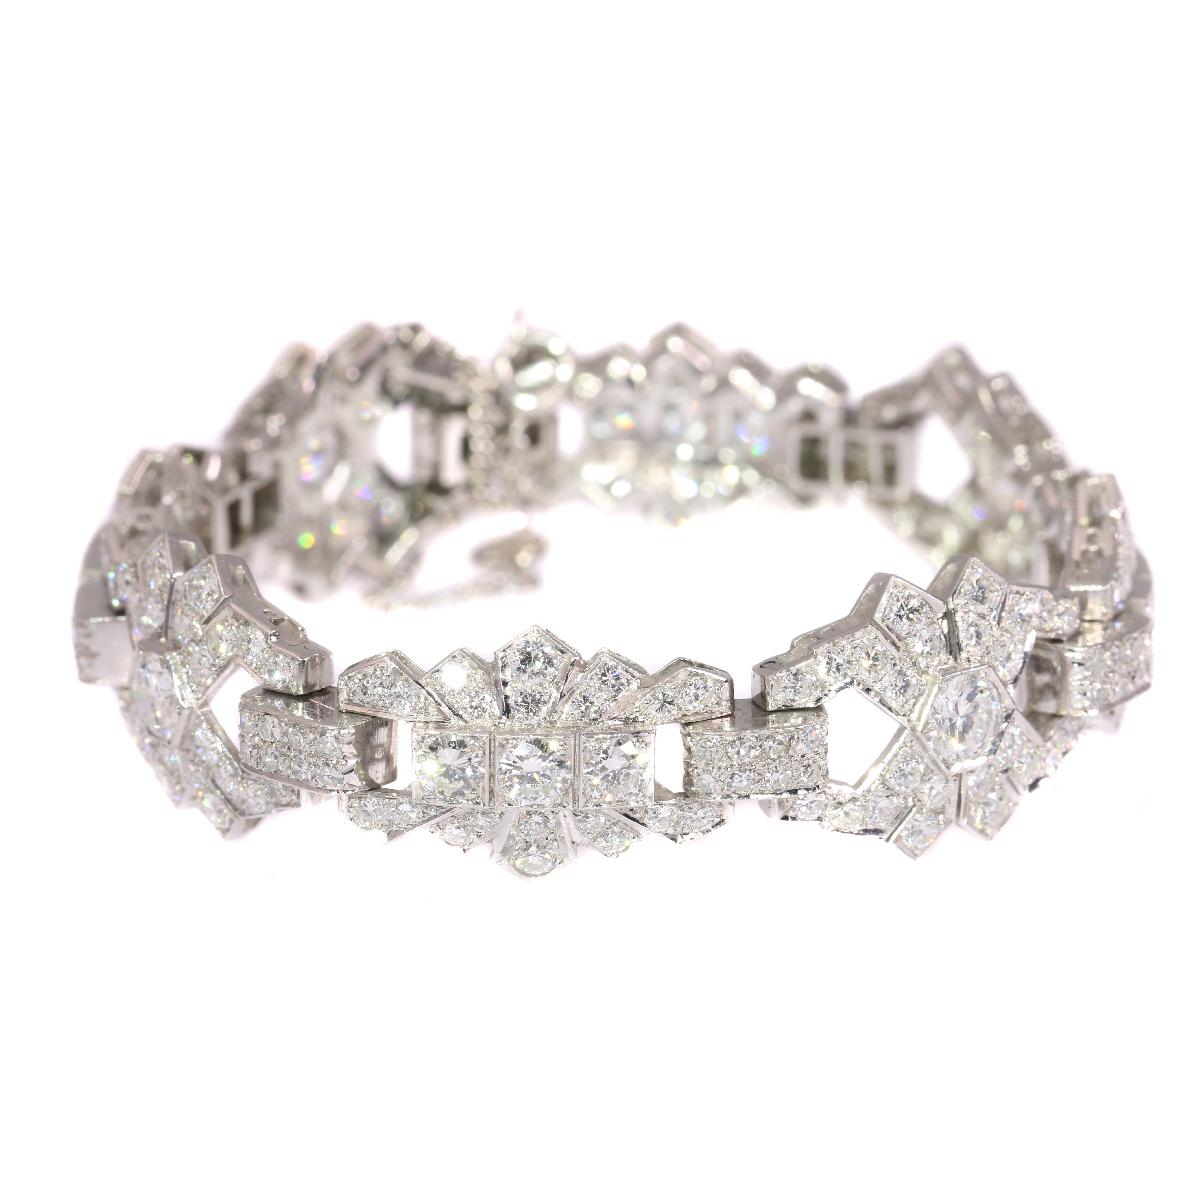 Vintage Platinum 12 Carat Diamond Bracelet, Art Deco Style Made in the 1950s In Excellent Condition For Sale In Antwerp, BE